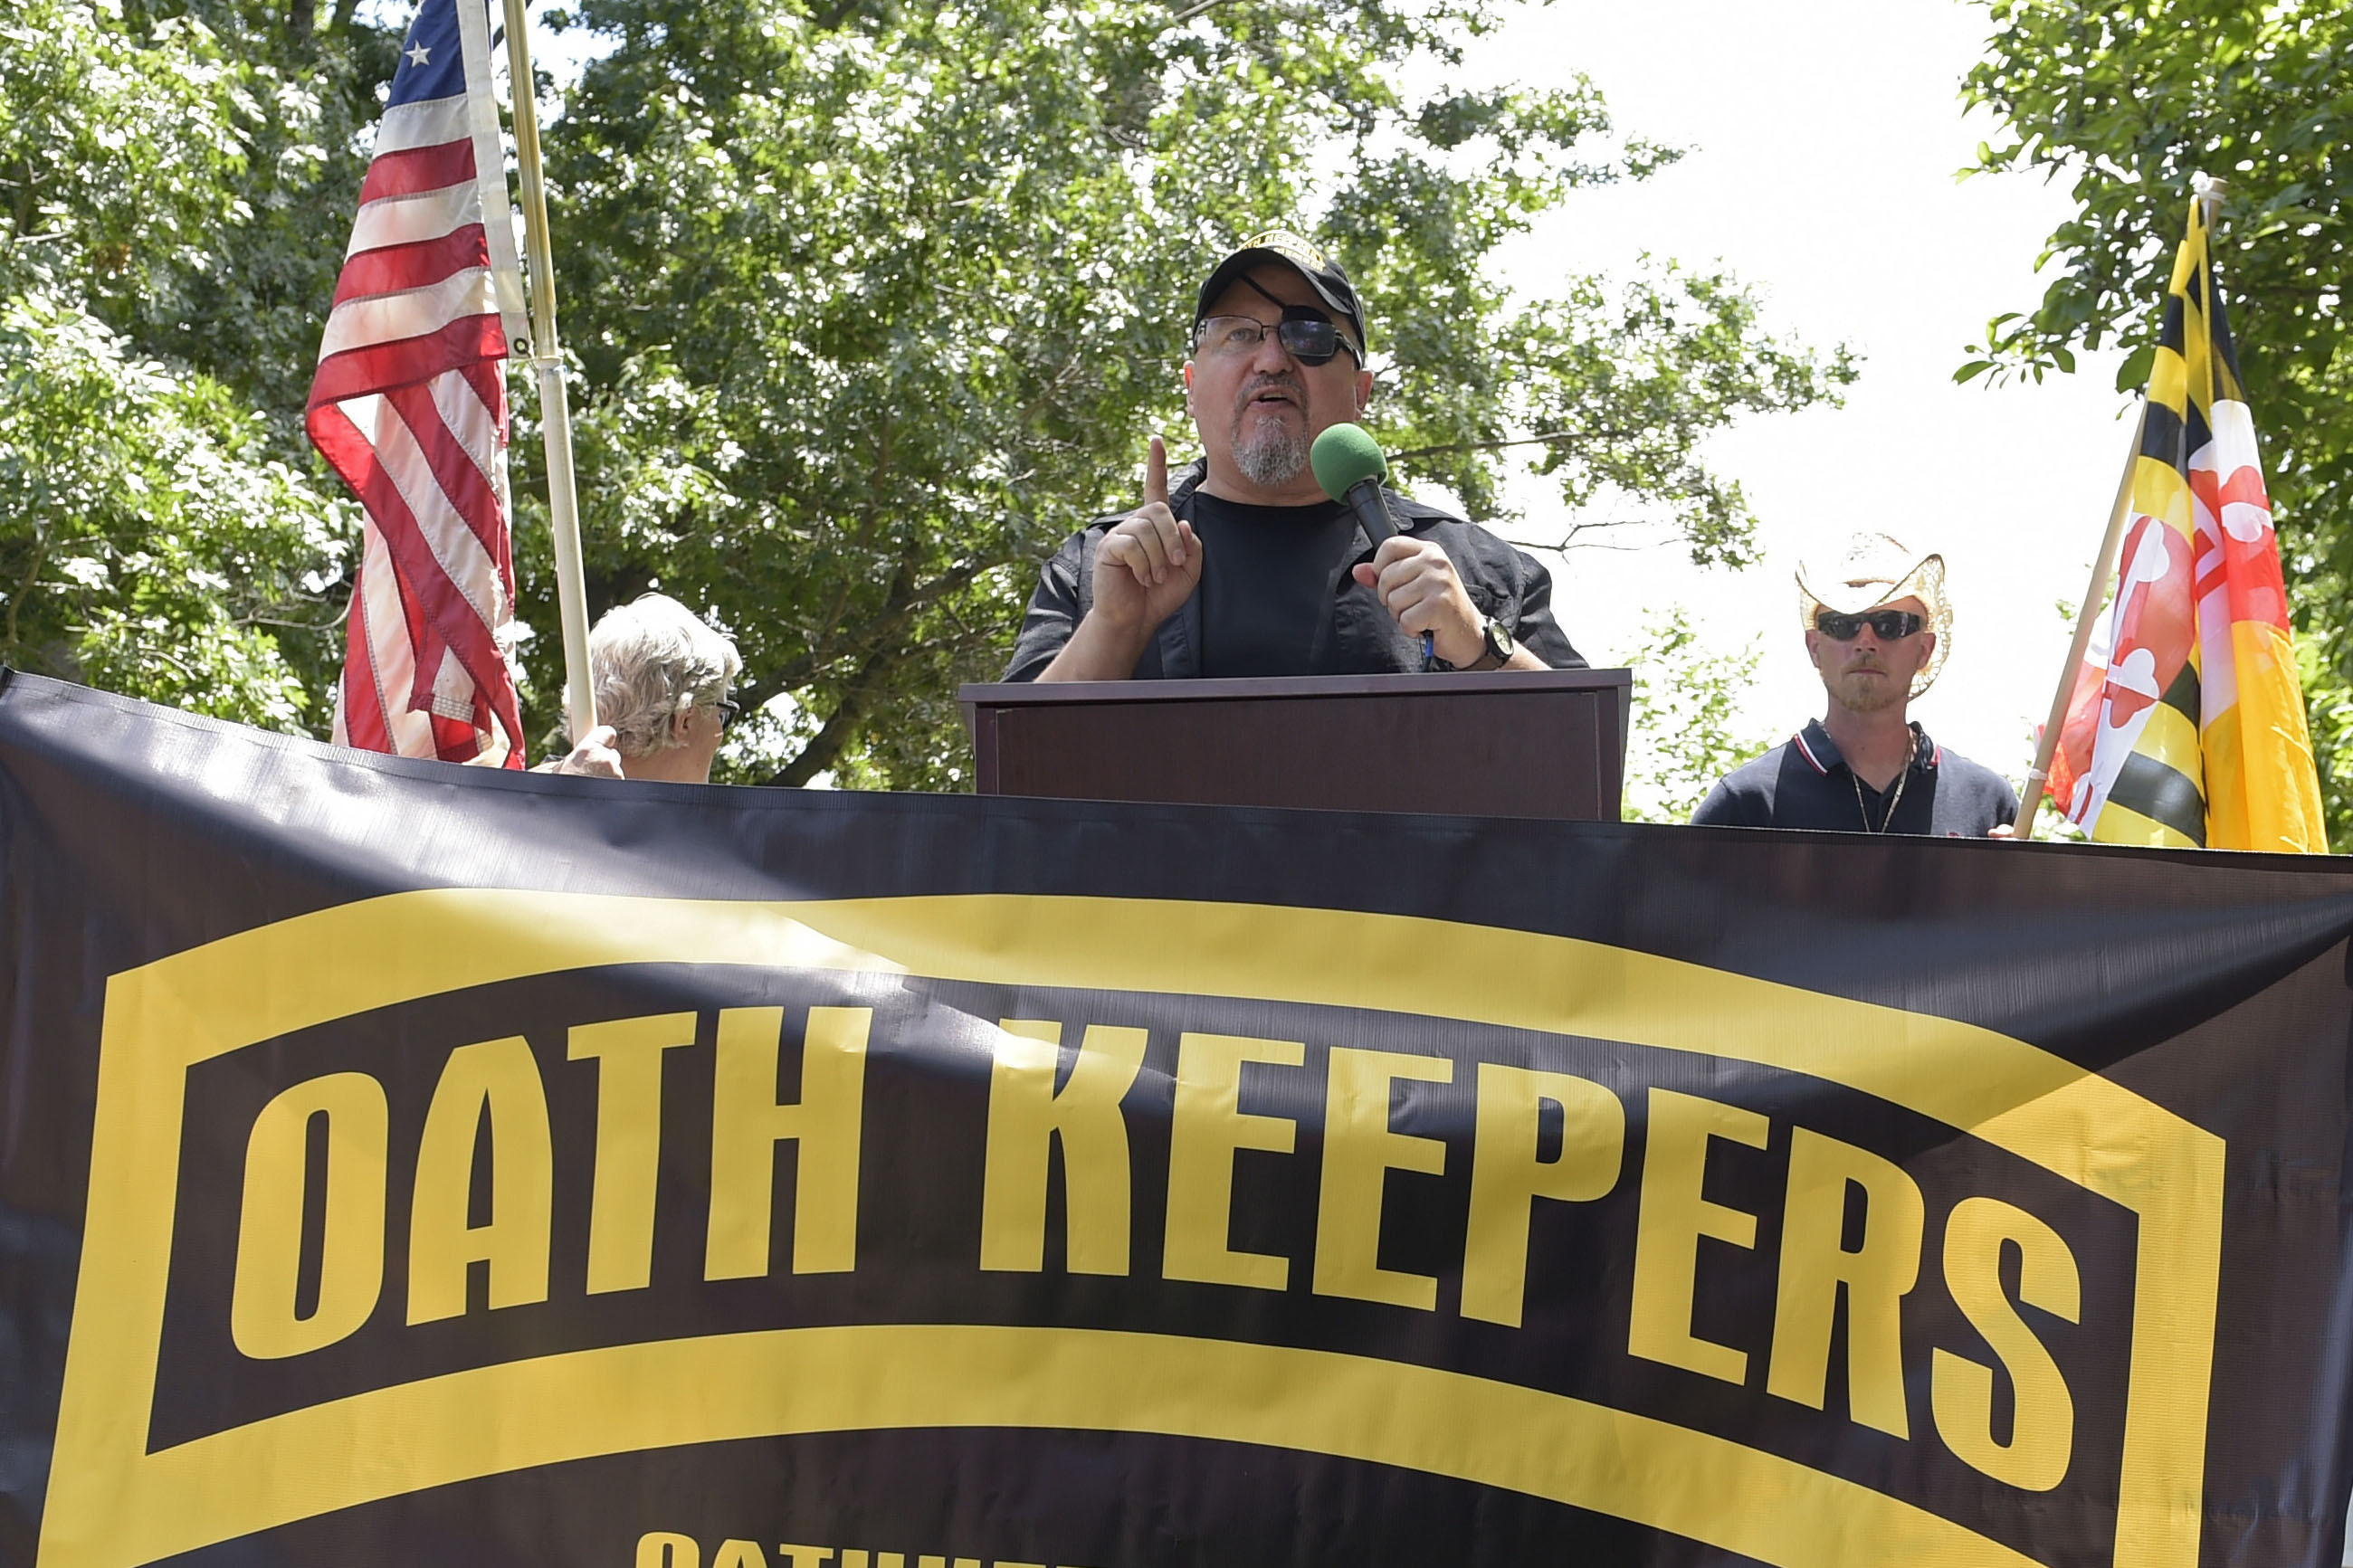 Stewart Rhodes, founder of the Oath Keepers, center, speaks during a rally outside the White House in Washington, June 25, 2017.   